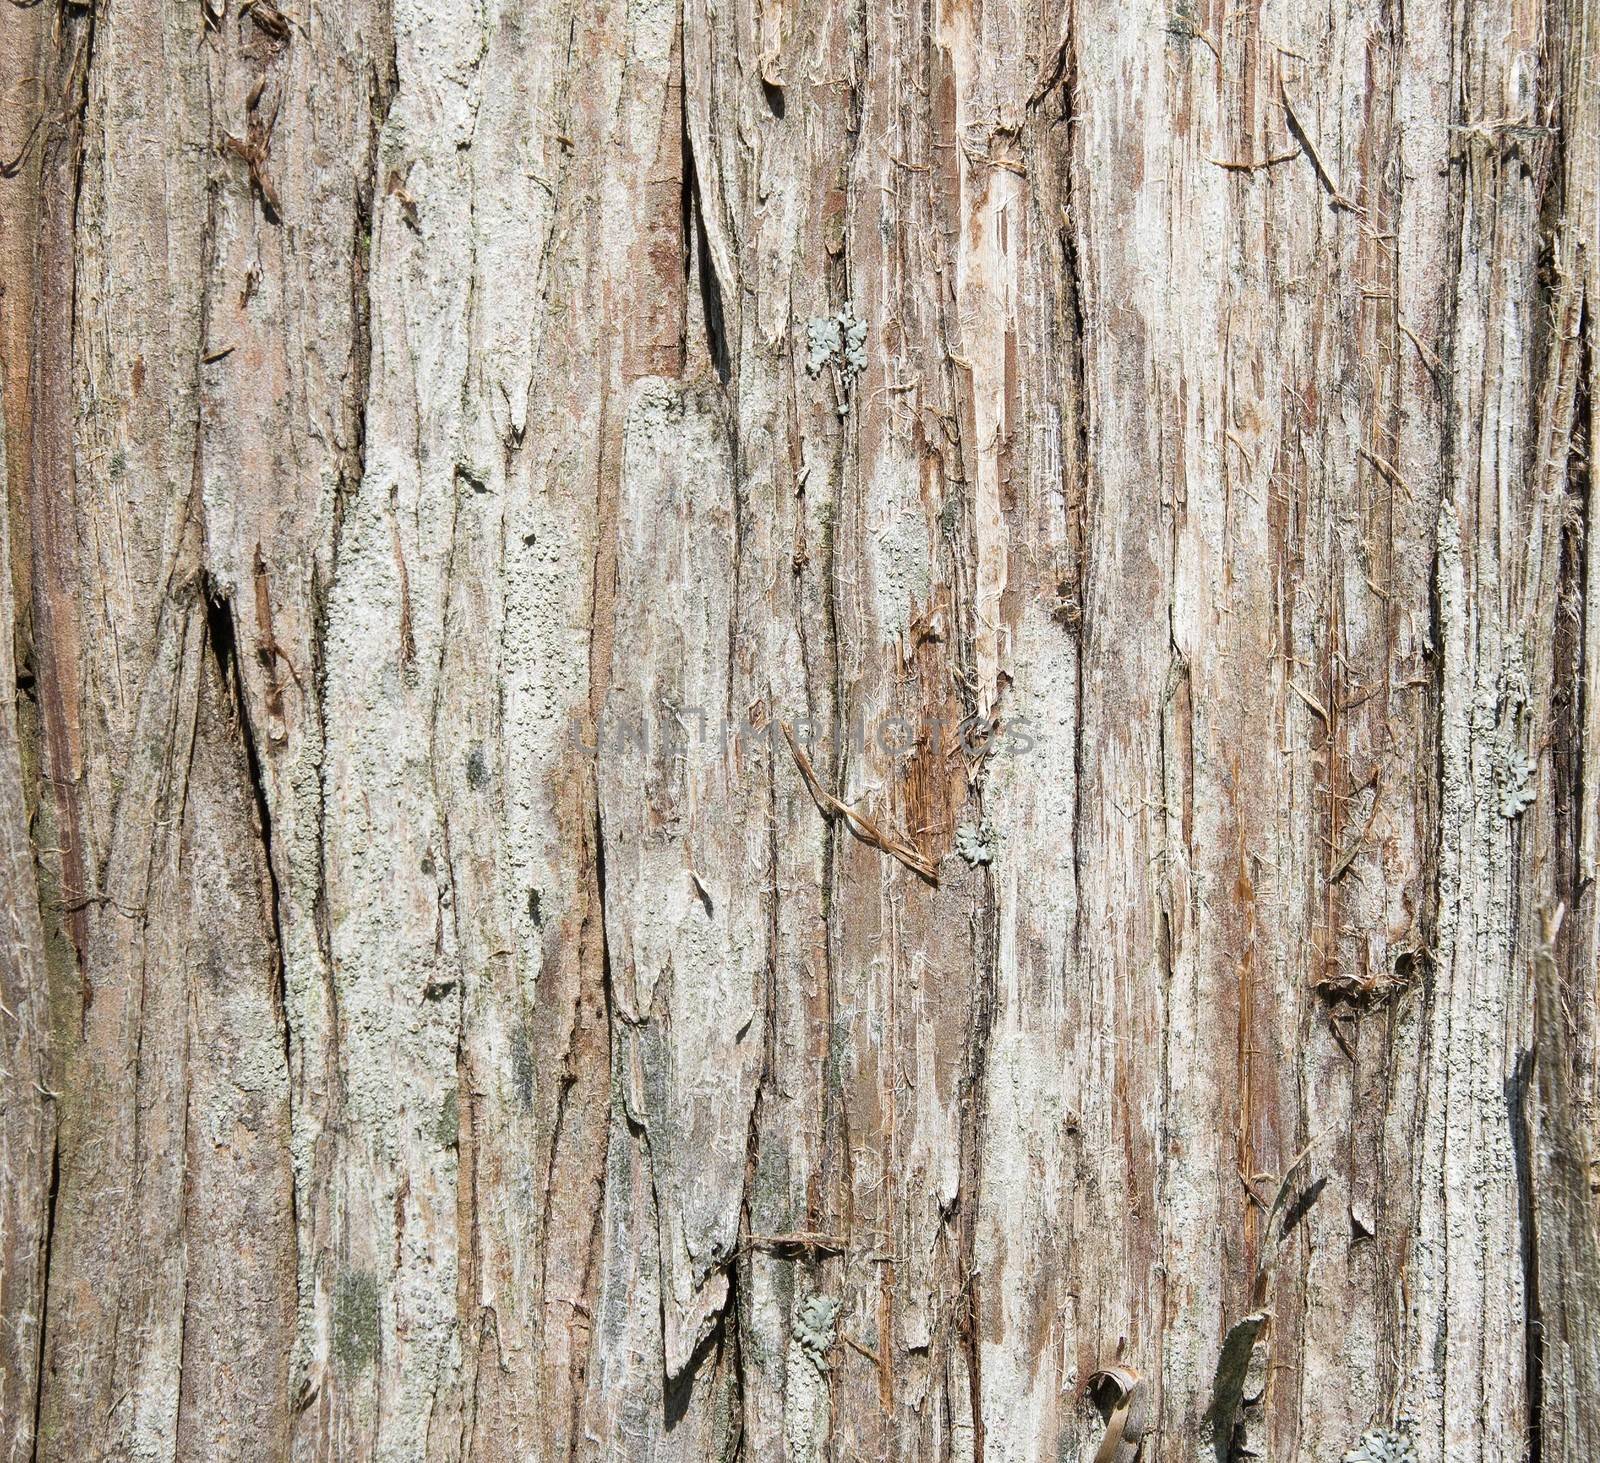 Wood tree texture background pattern